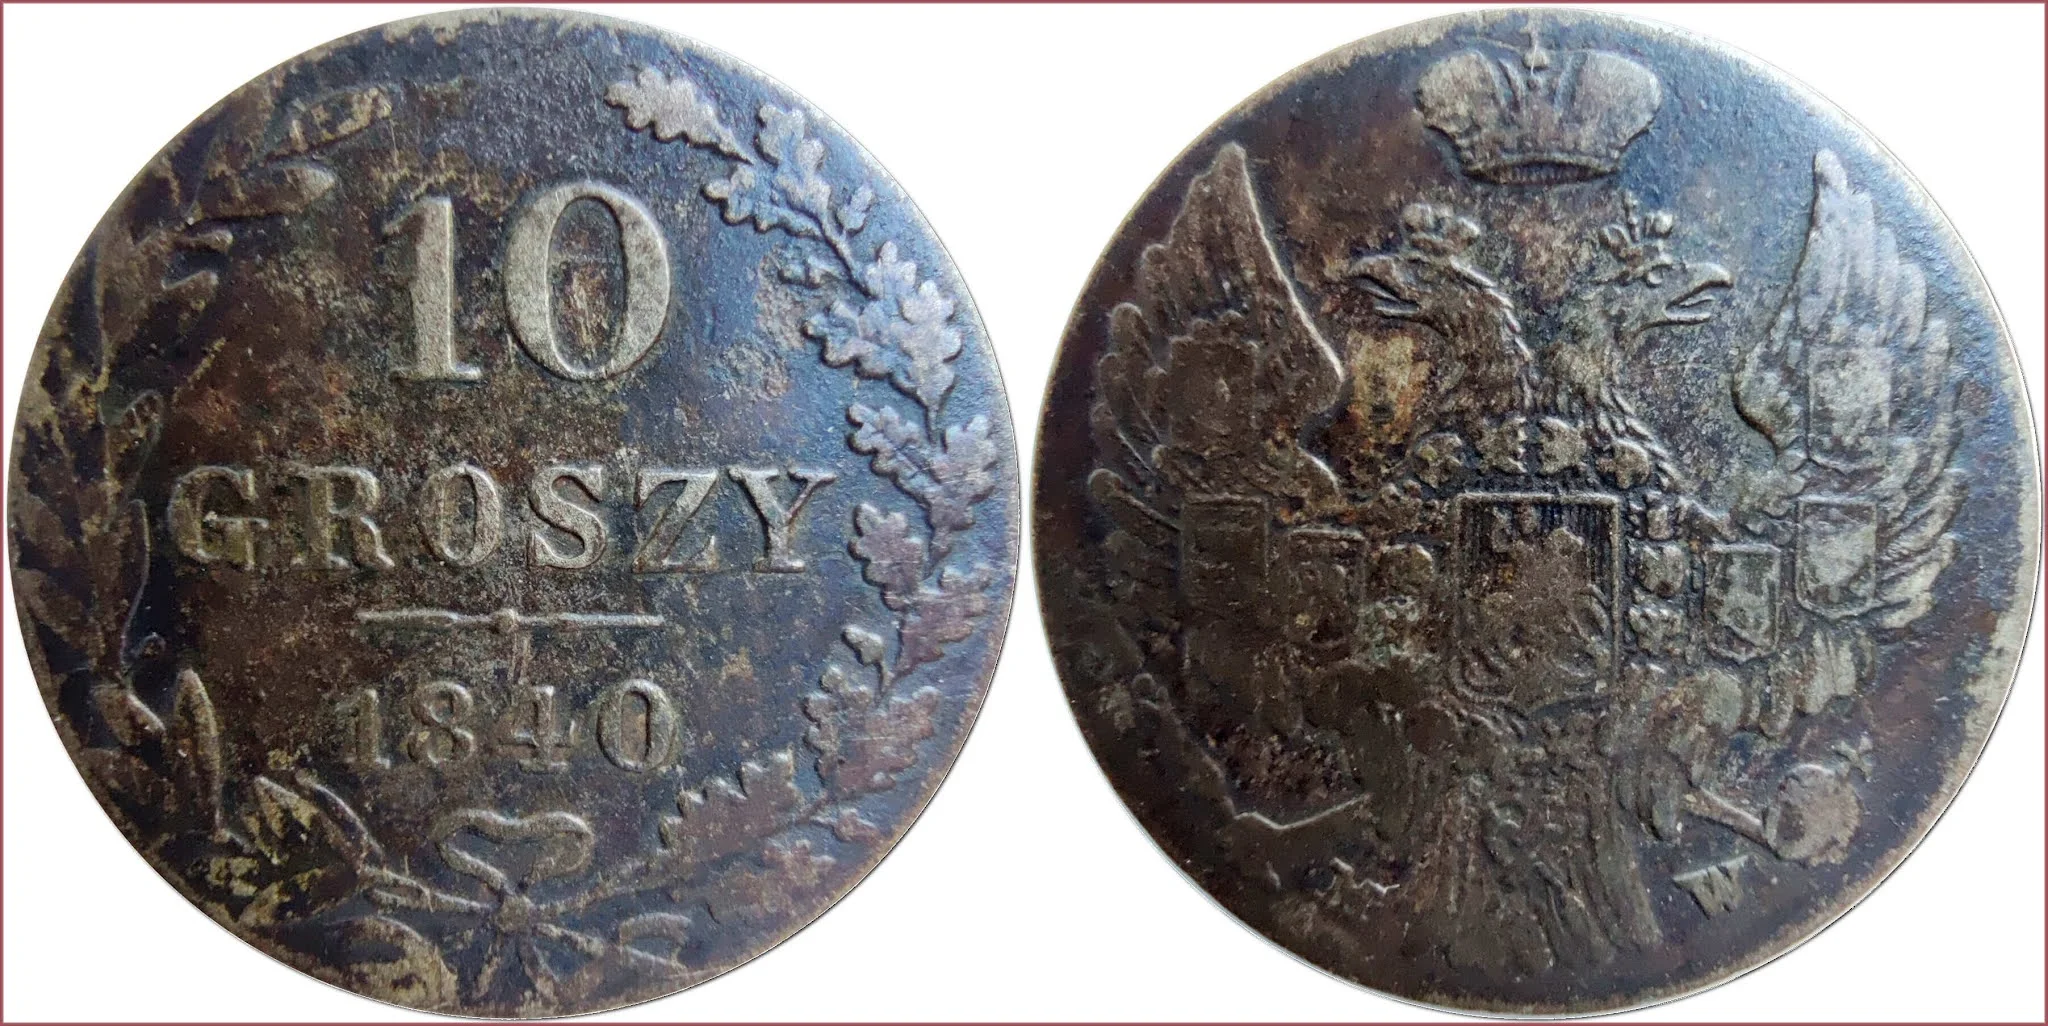 10 groszy, 1840: Russian partition of Poland